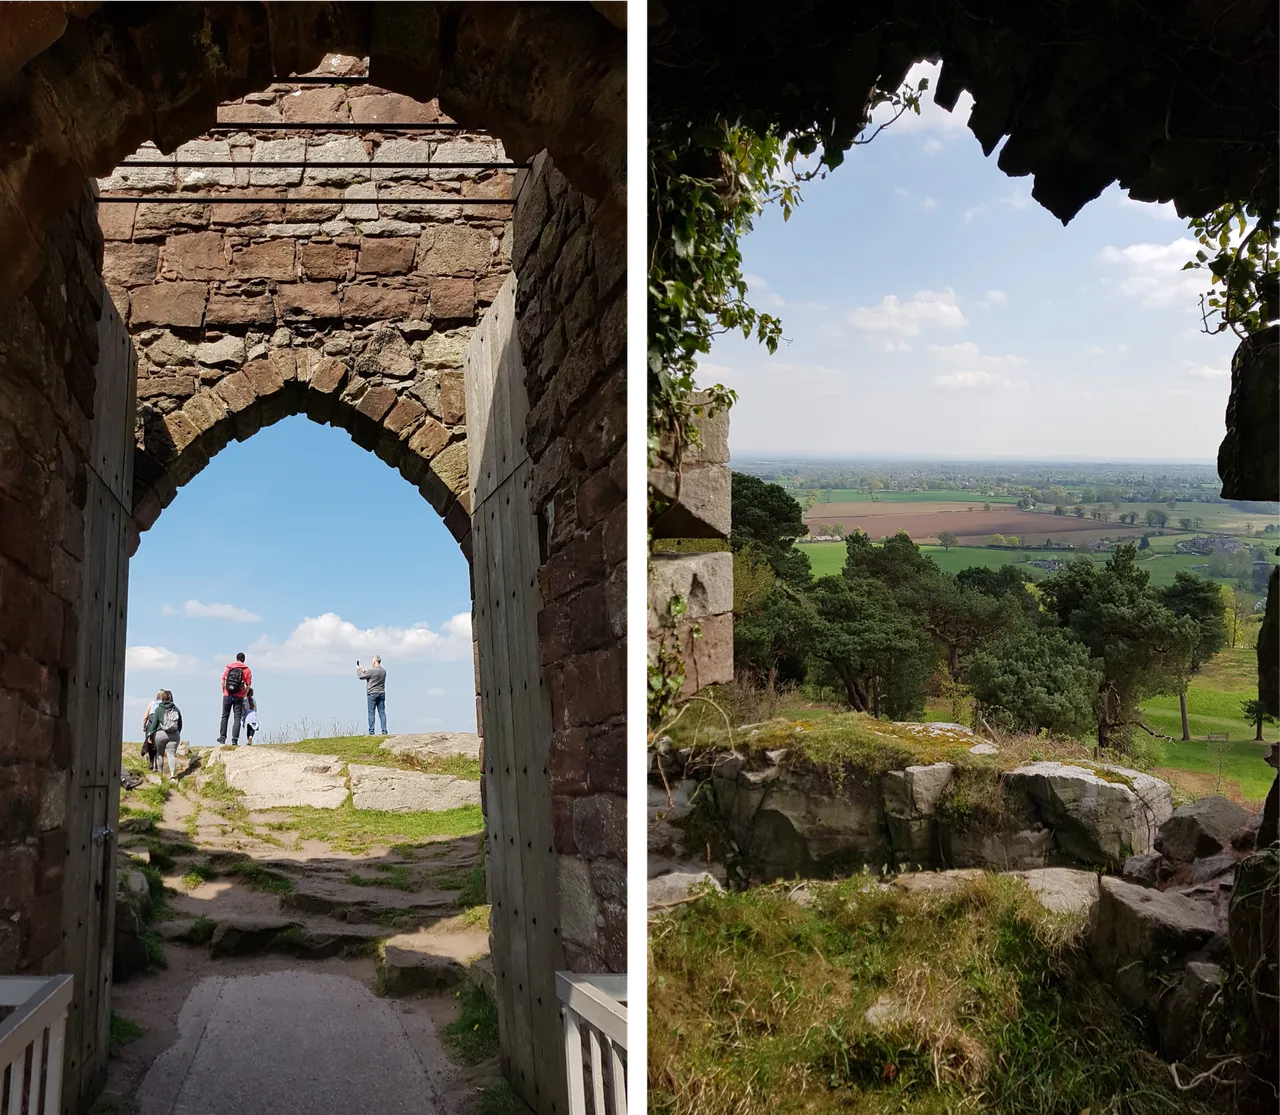 A view through the main gates of the hillfort and across the plains from a window of the ruins.